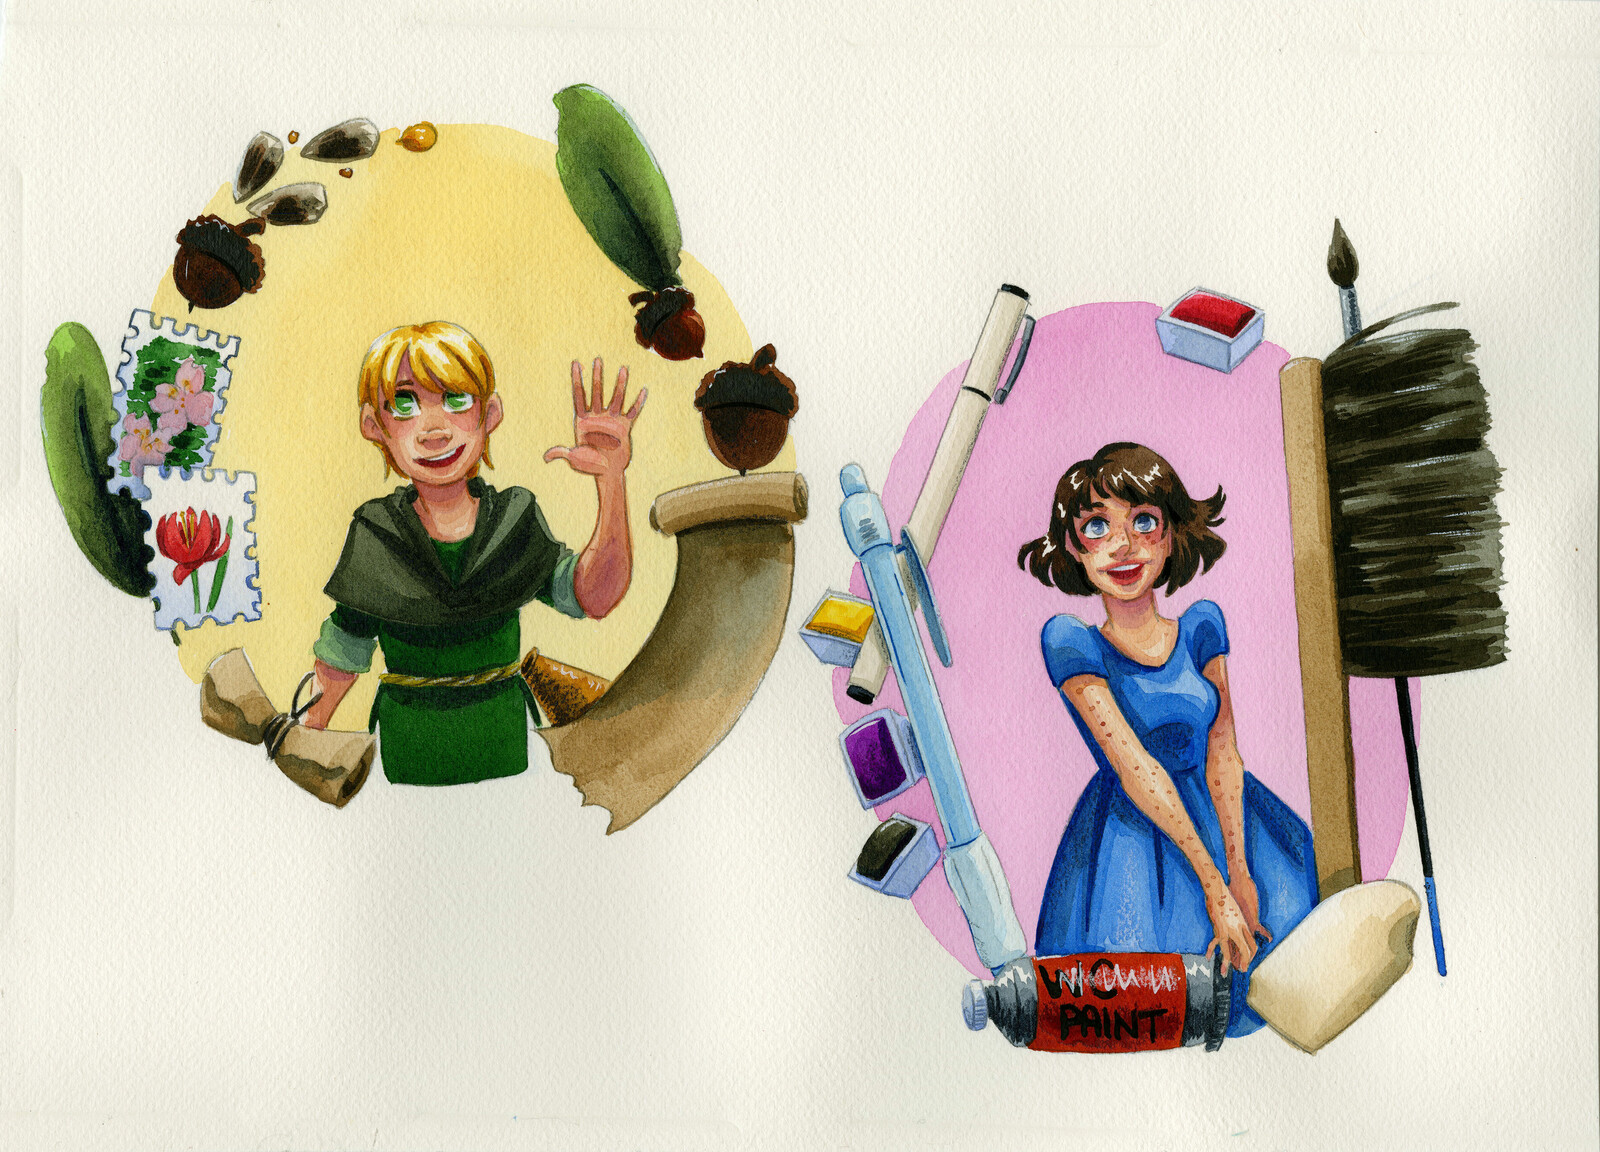 Final cast of characters watercolor illustrations.